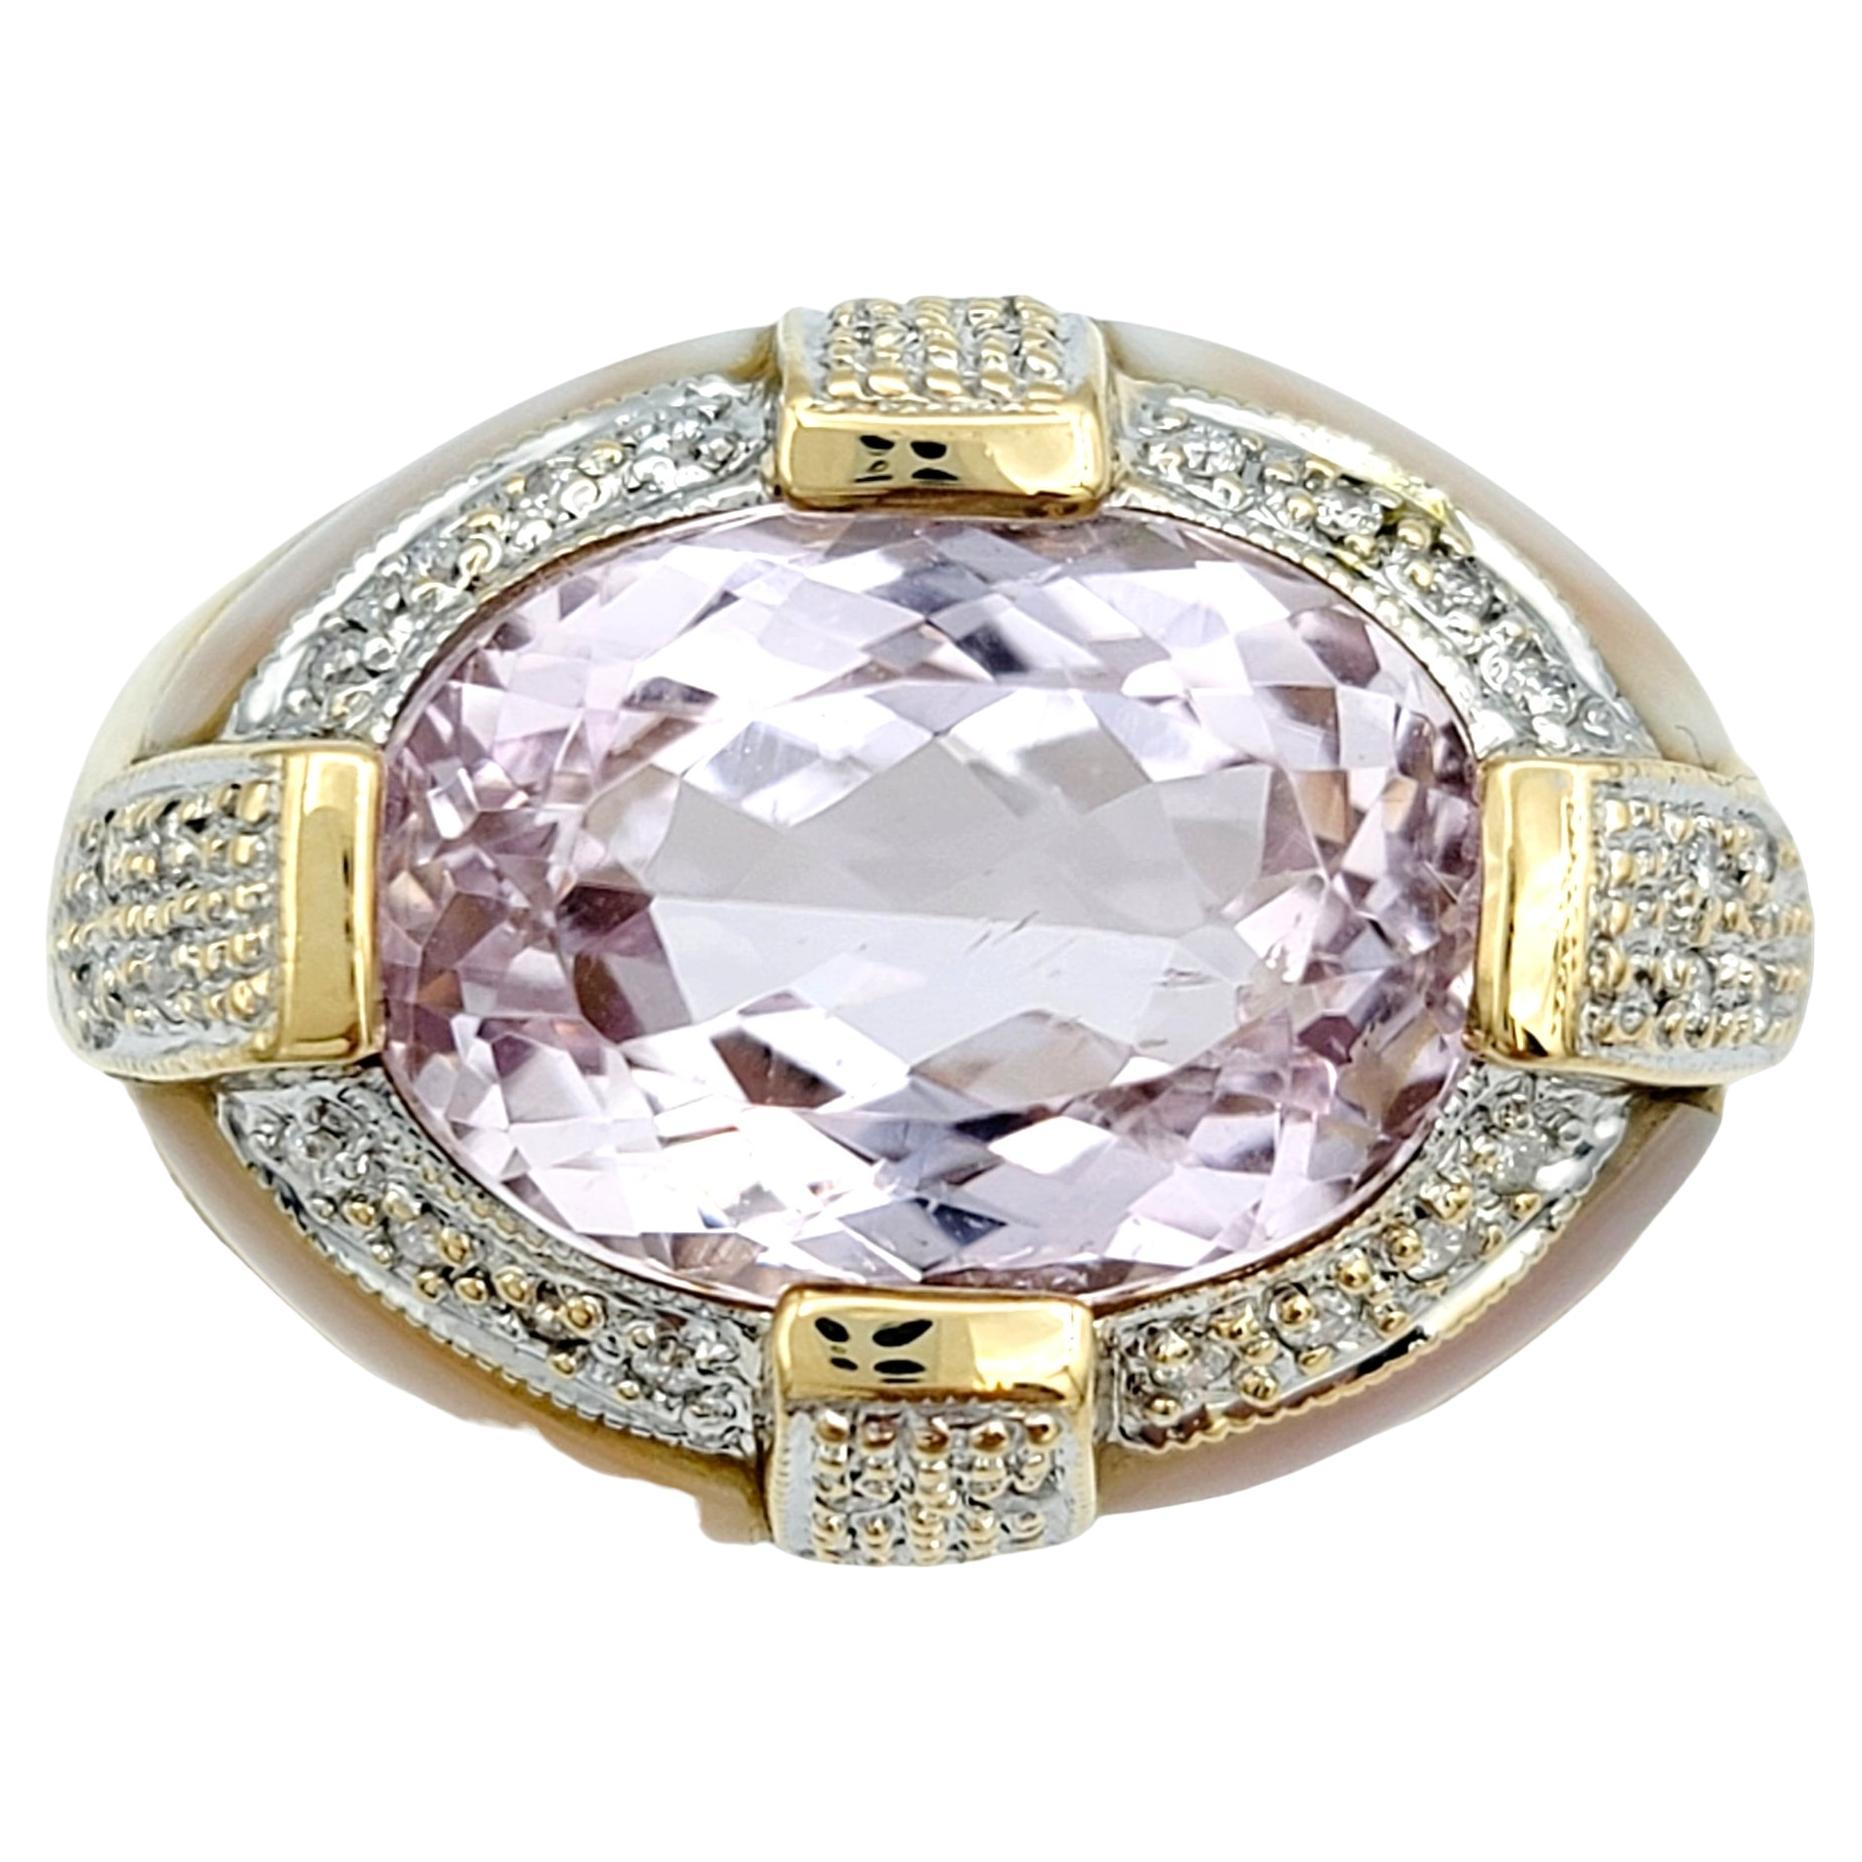 Oval Cut Kunzite, Diamond, and Mother of Pearl Cocktail Ring in 14 Karat Gold